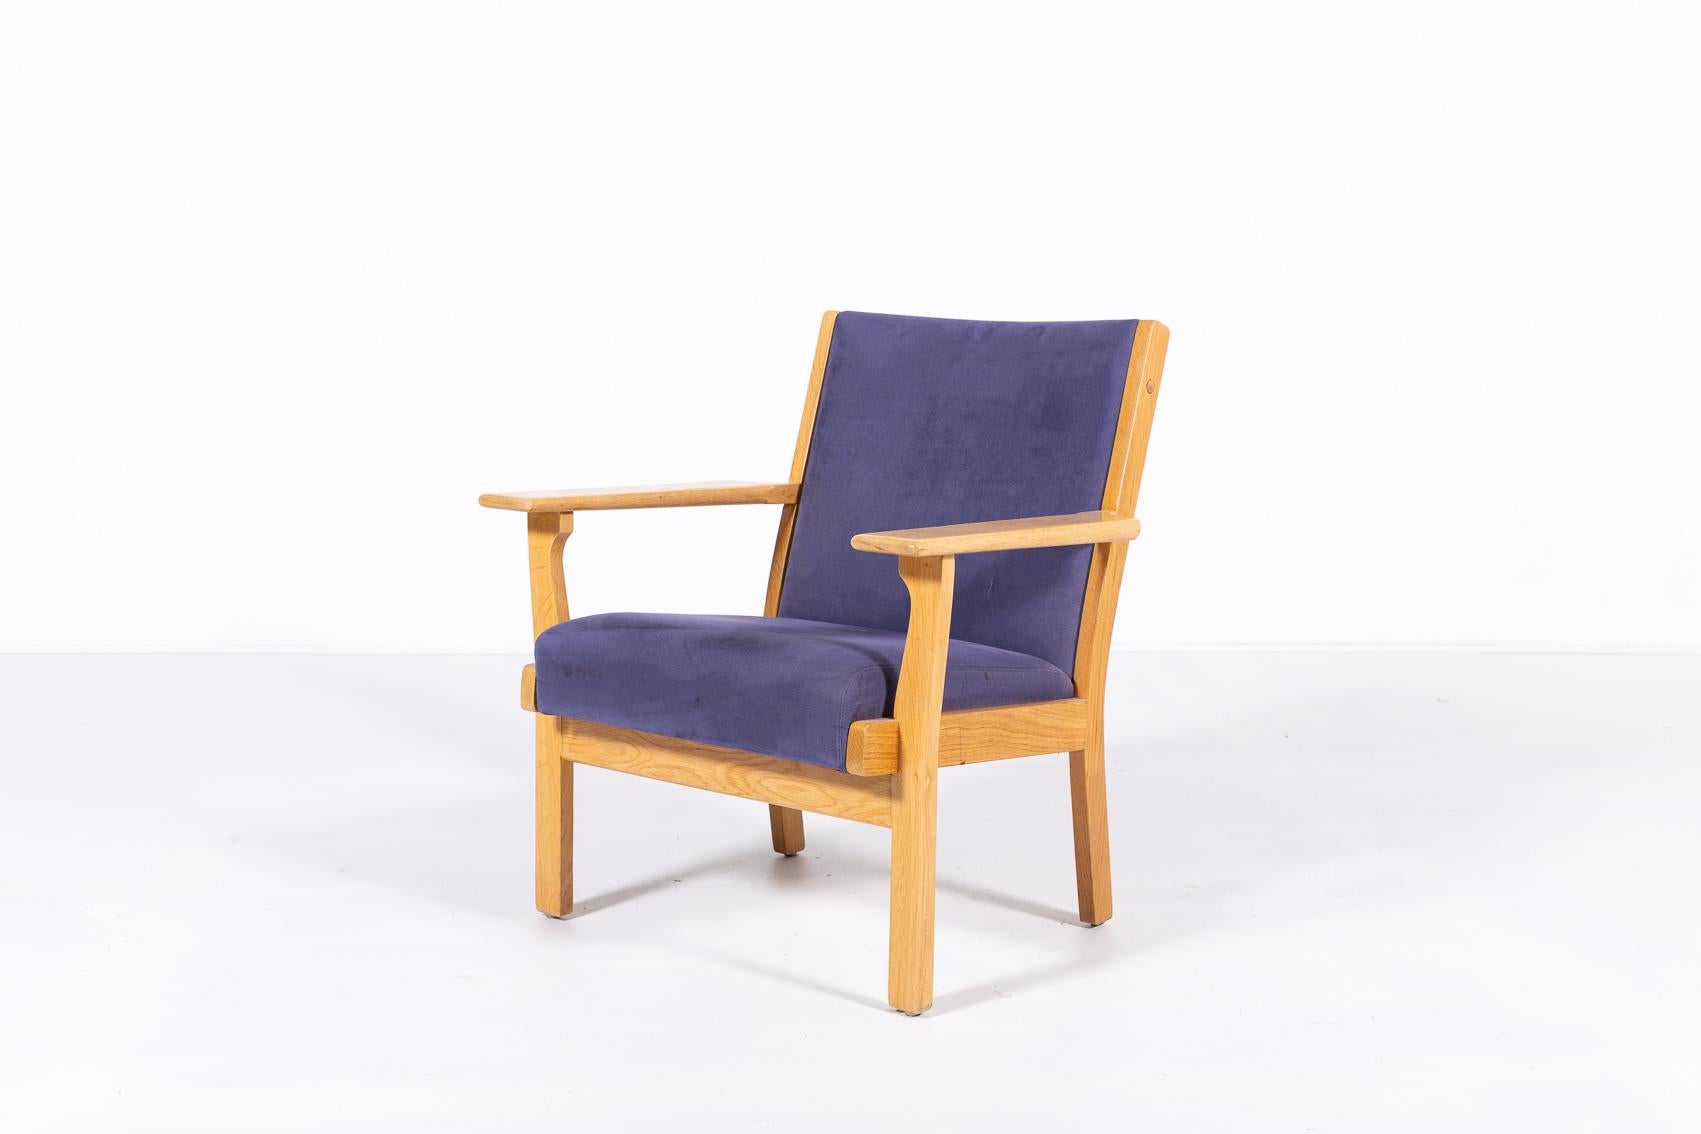 Vintage chair designed by Hans. J. Wegner for Getama. The seat and backrest is upholstered in blue alcantara with a frame in solid lacquered/varnished oak.

Condition
Good, usage marks

Dimensions
width: 75 cm
height: 84 cm
depth: 68 cm
seat height: